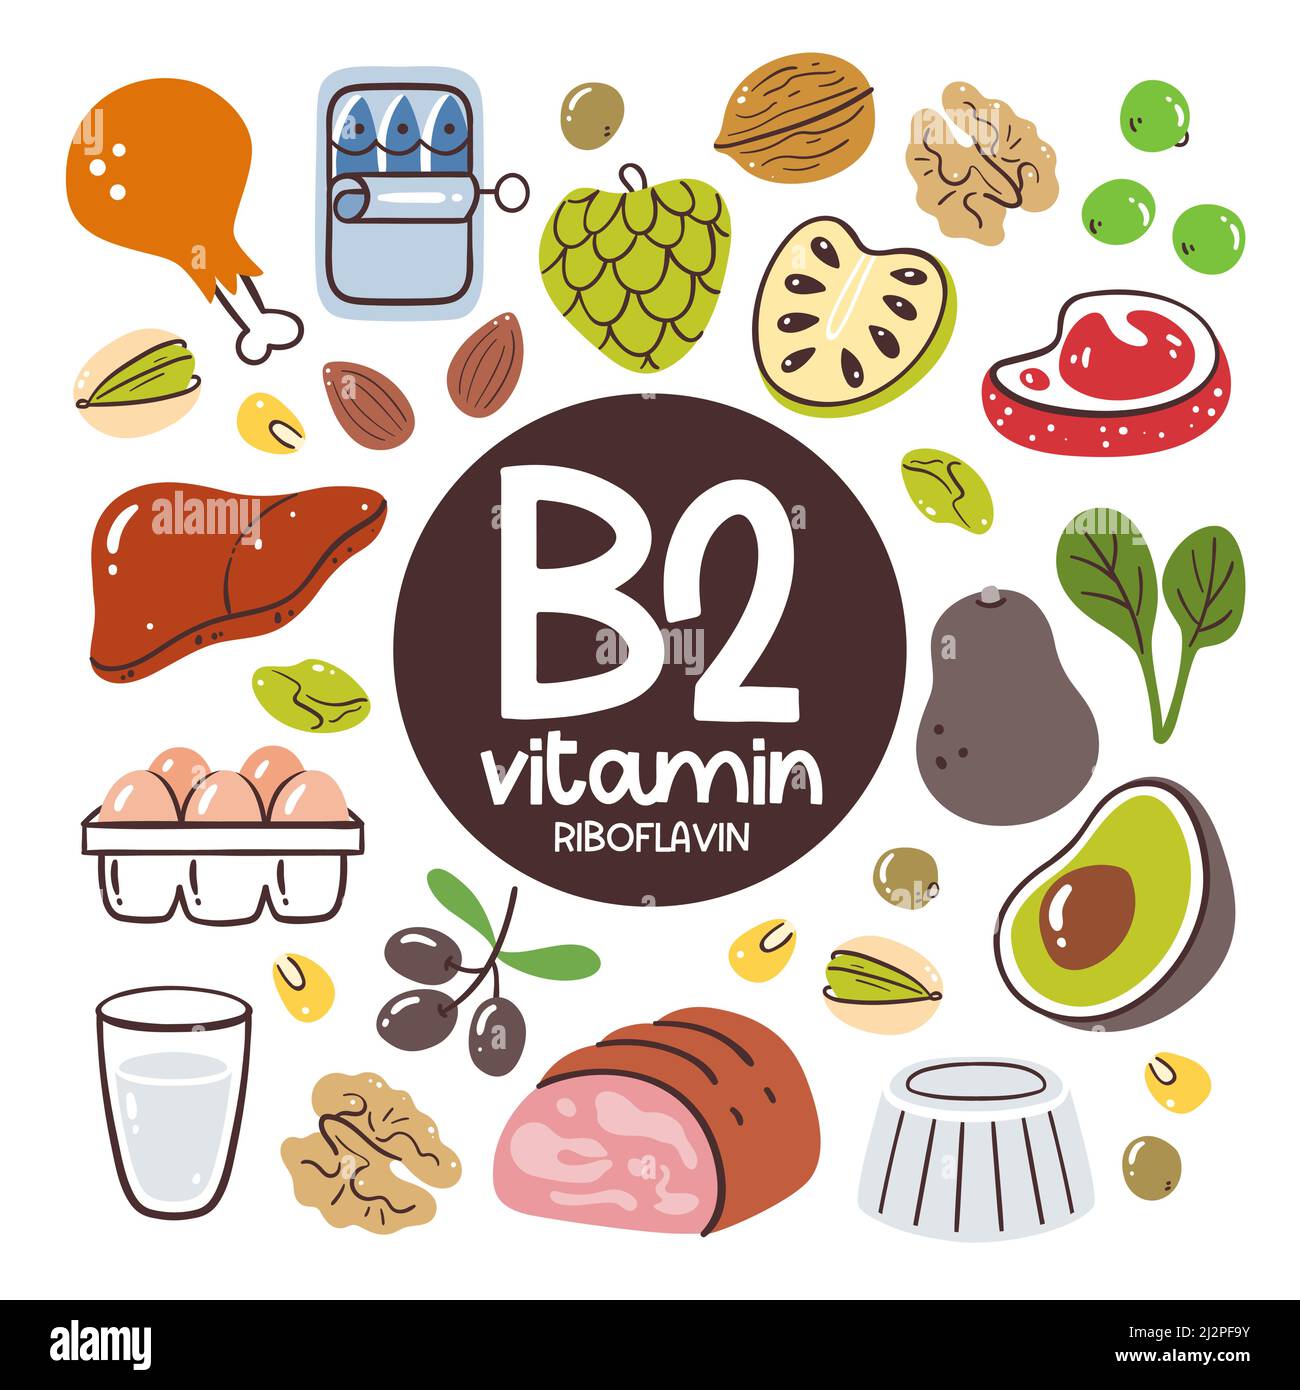 Food products with high level of Vitamin B2 (Riboflavin). Cooking ingredients. Fruits, vegetables, meat, nuts, dairy products. Stock Vector